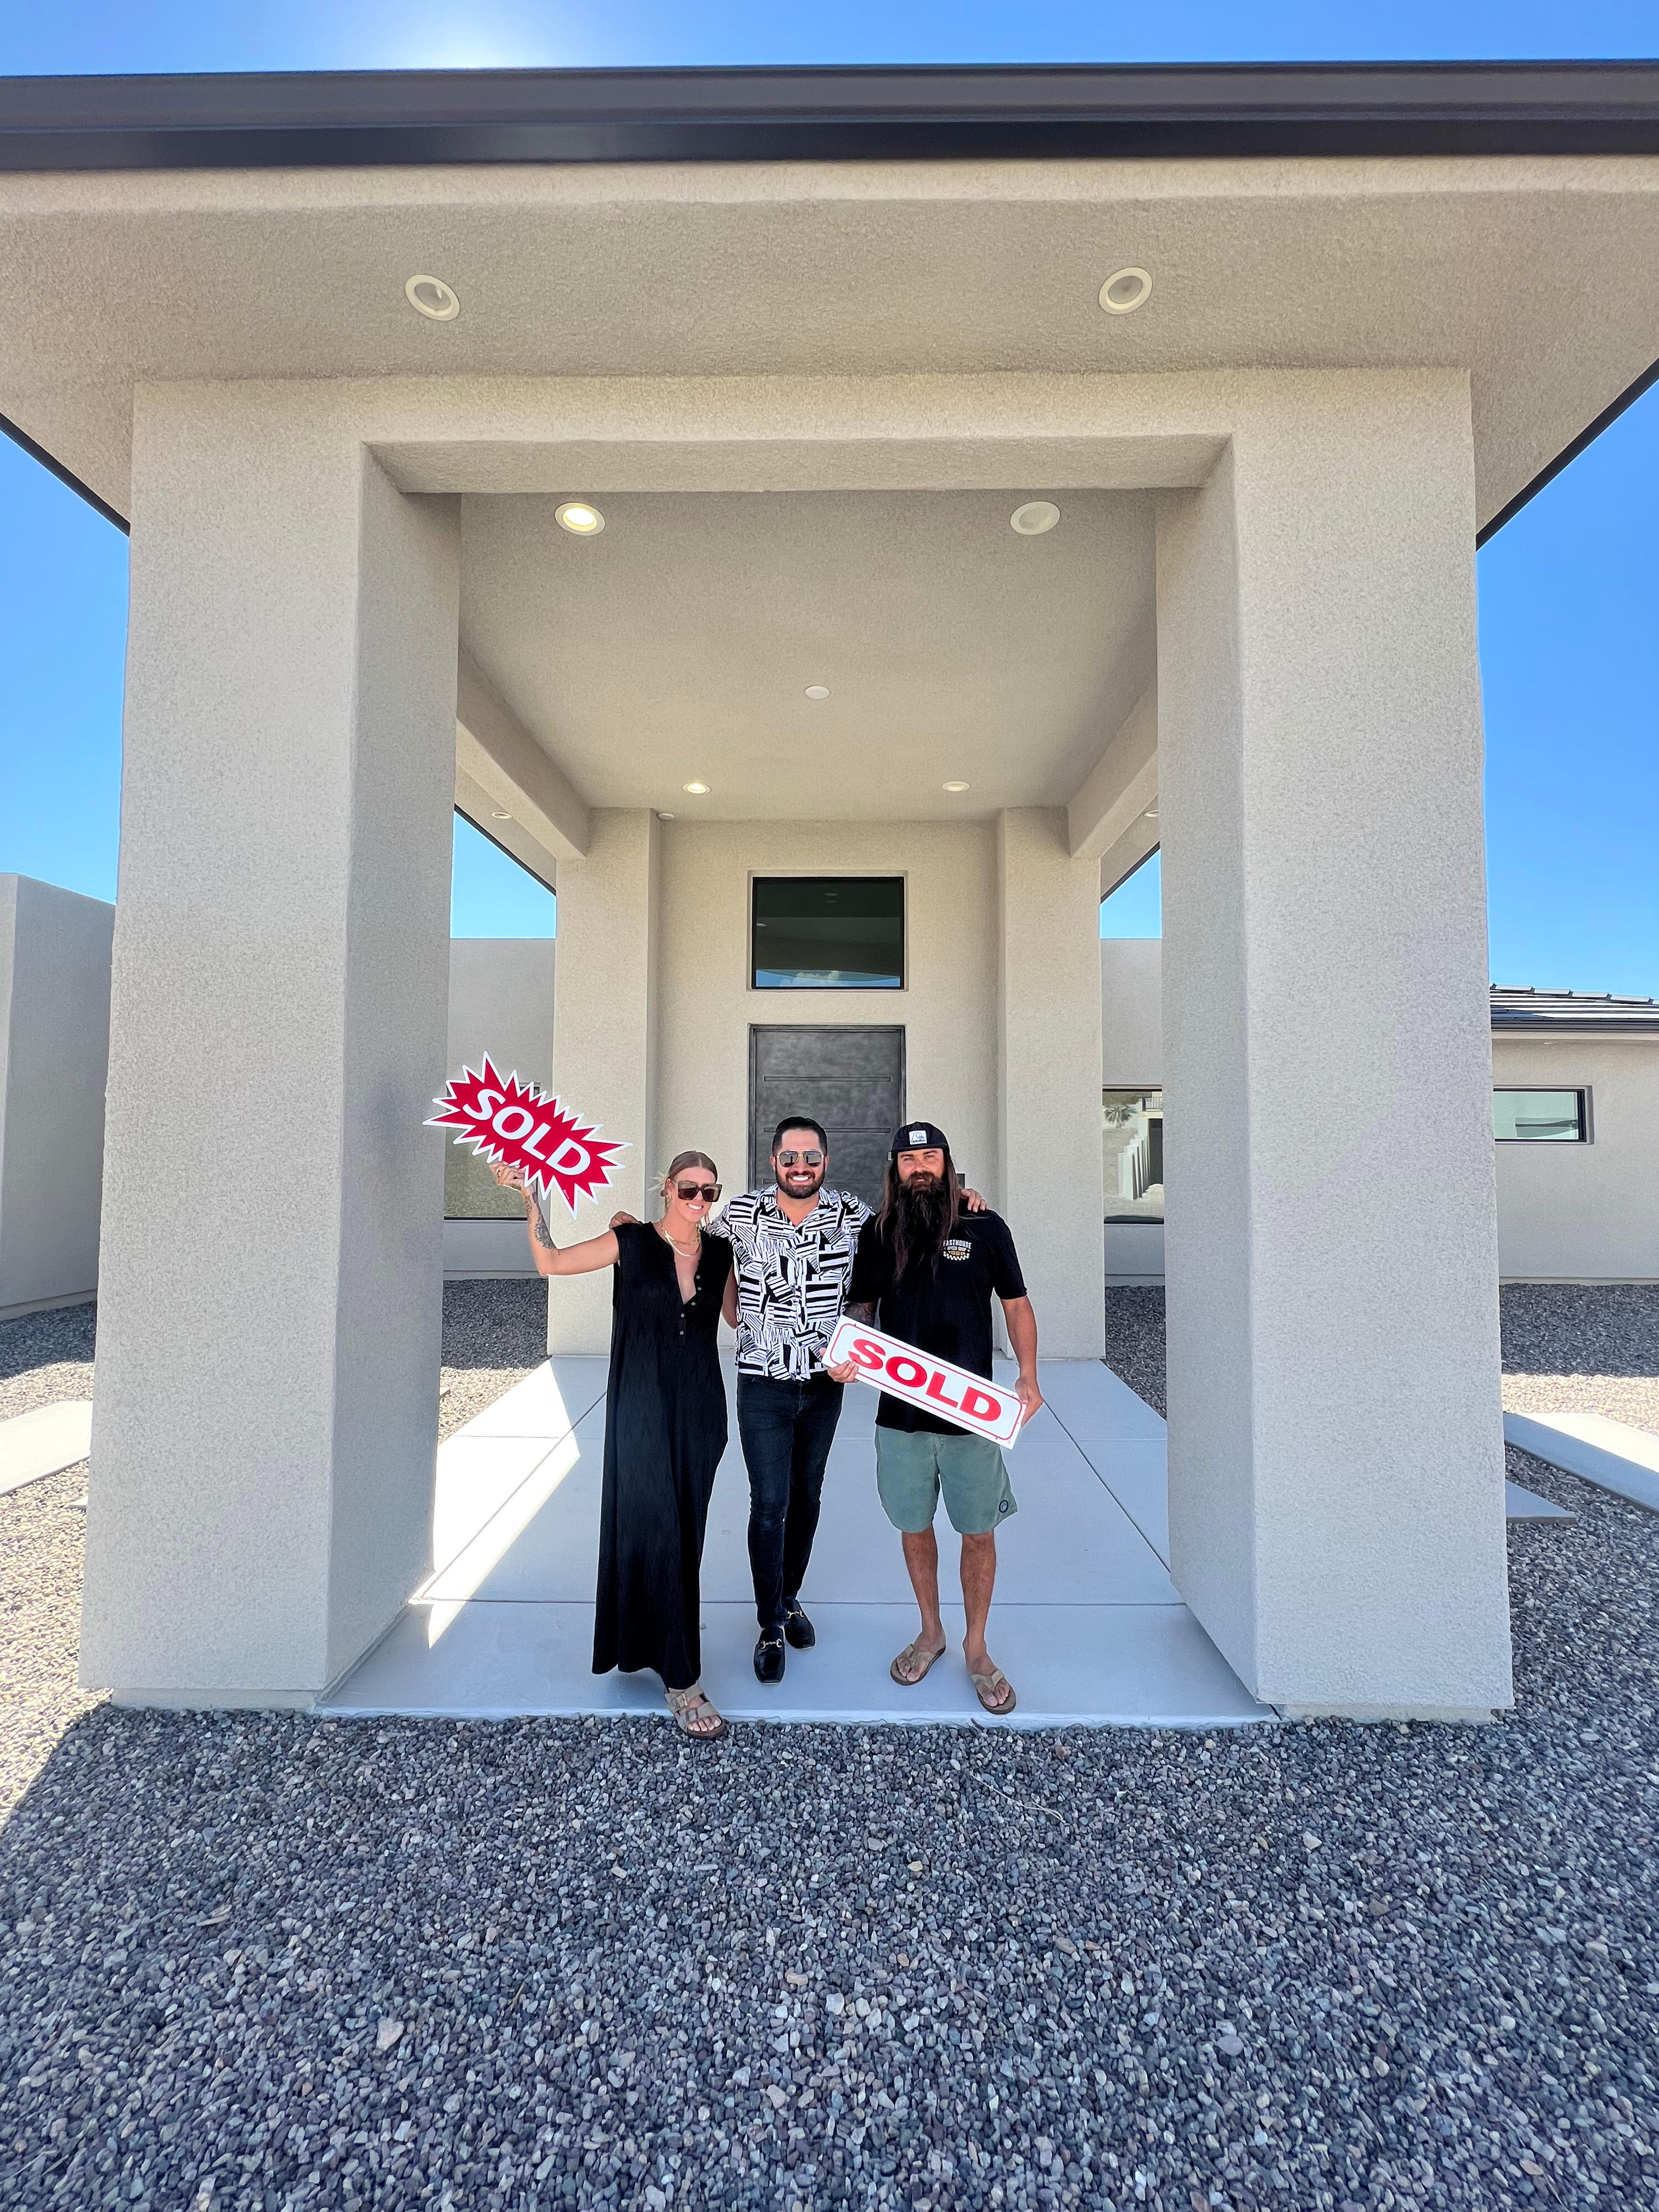 Have you been searching to buy a new home in Bullhead City? Our real estate agents at The Gedalje Group can help you find your dream home. Check out our website to view our beautiful homes for sale!